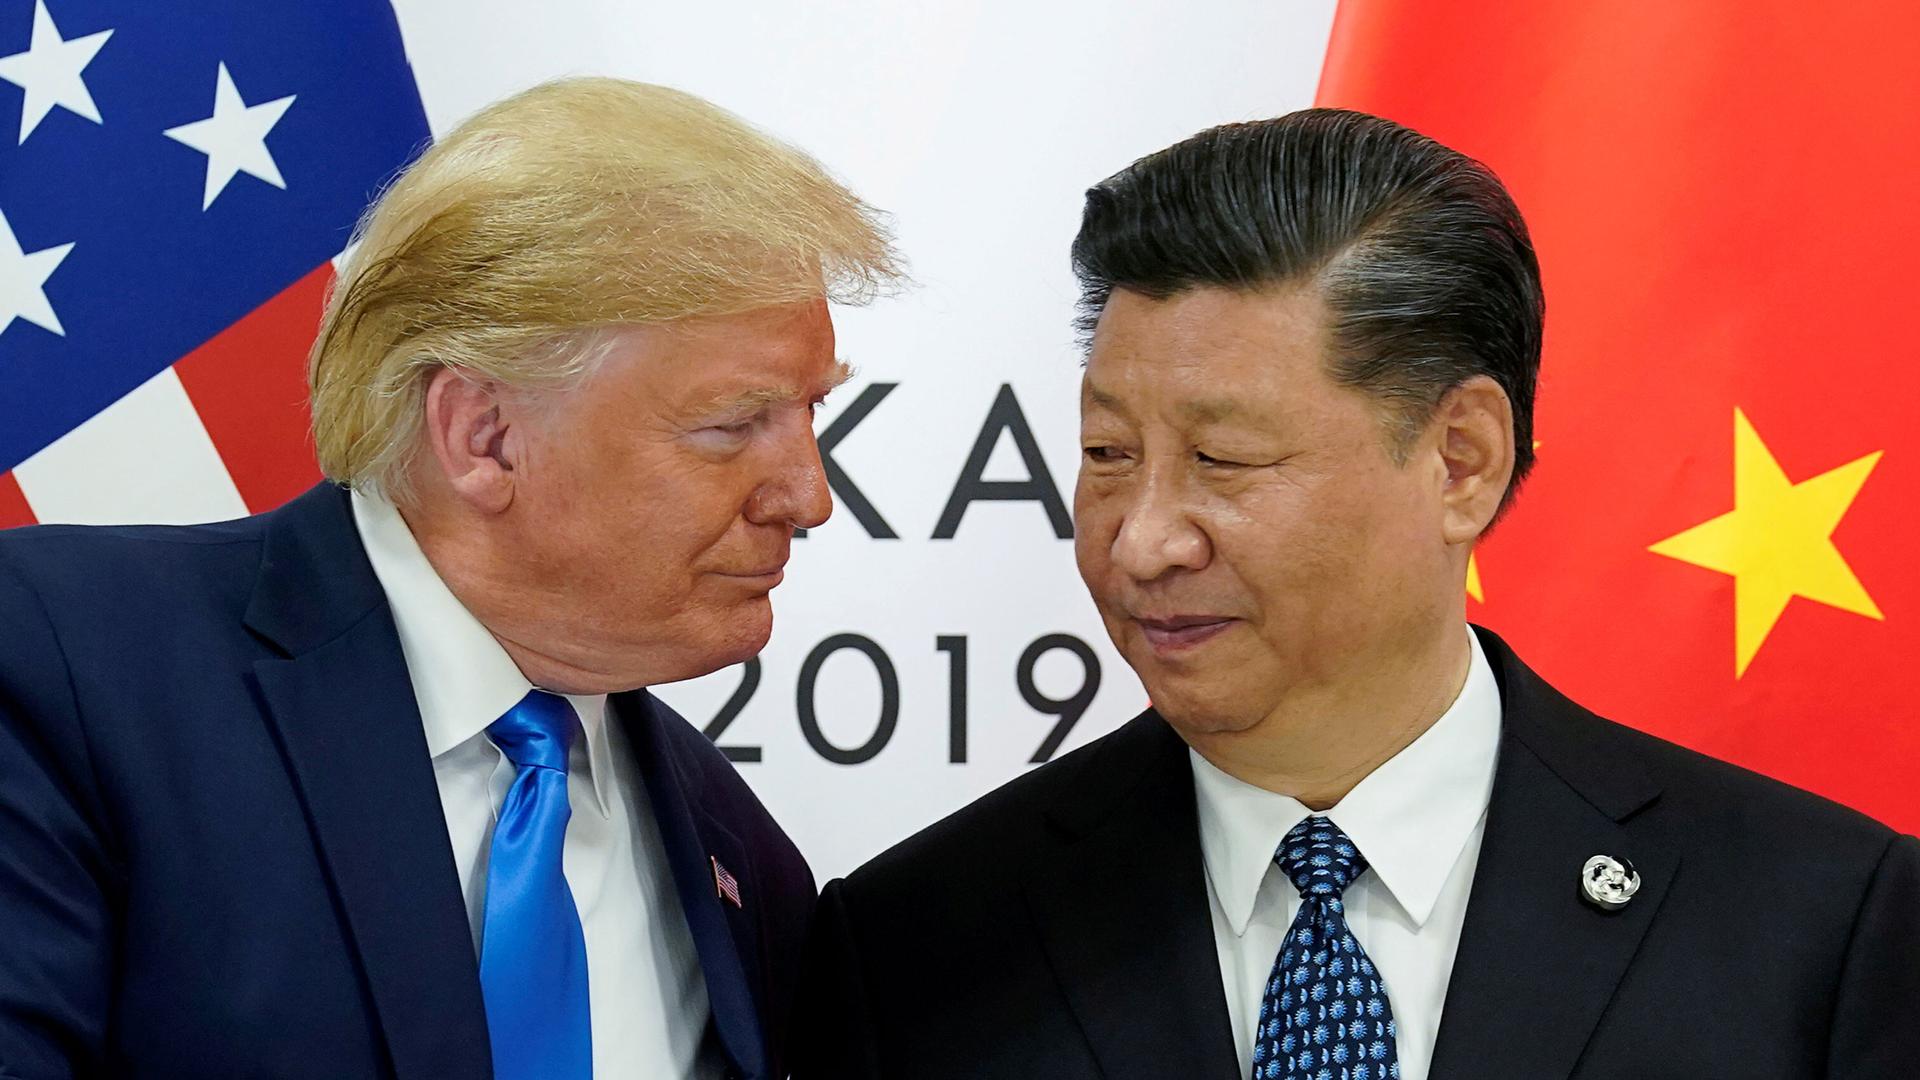 US President Donald Trump and China's President Xi Jinping are shown both wearing dark suits and ties while standing in front of the US and Chinese flags.